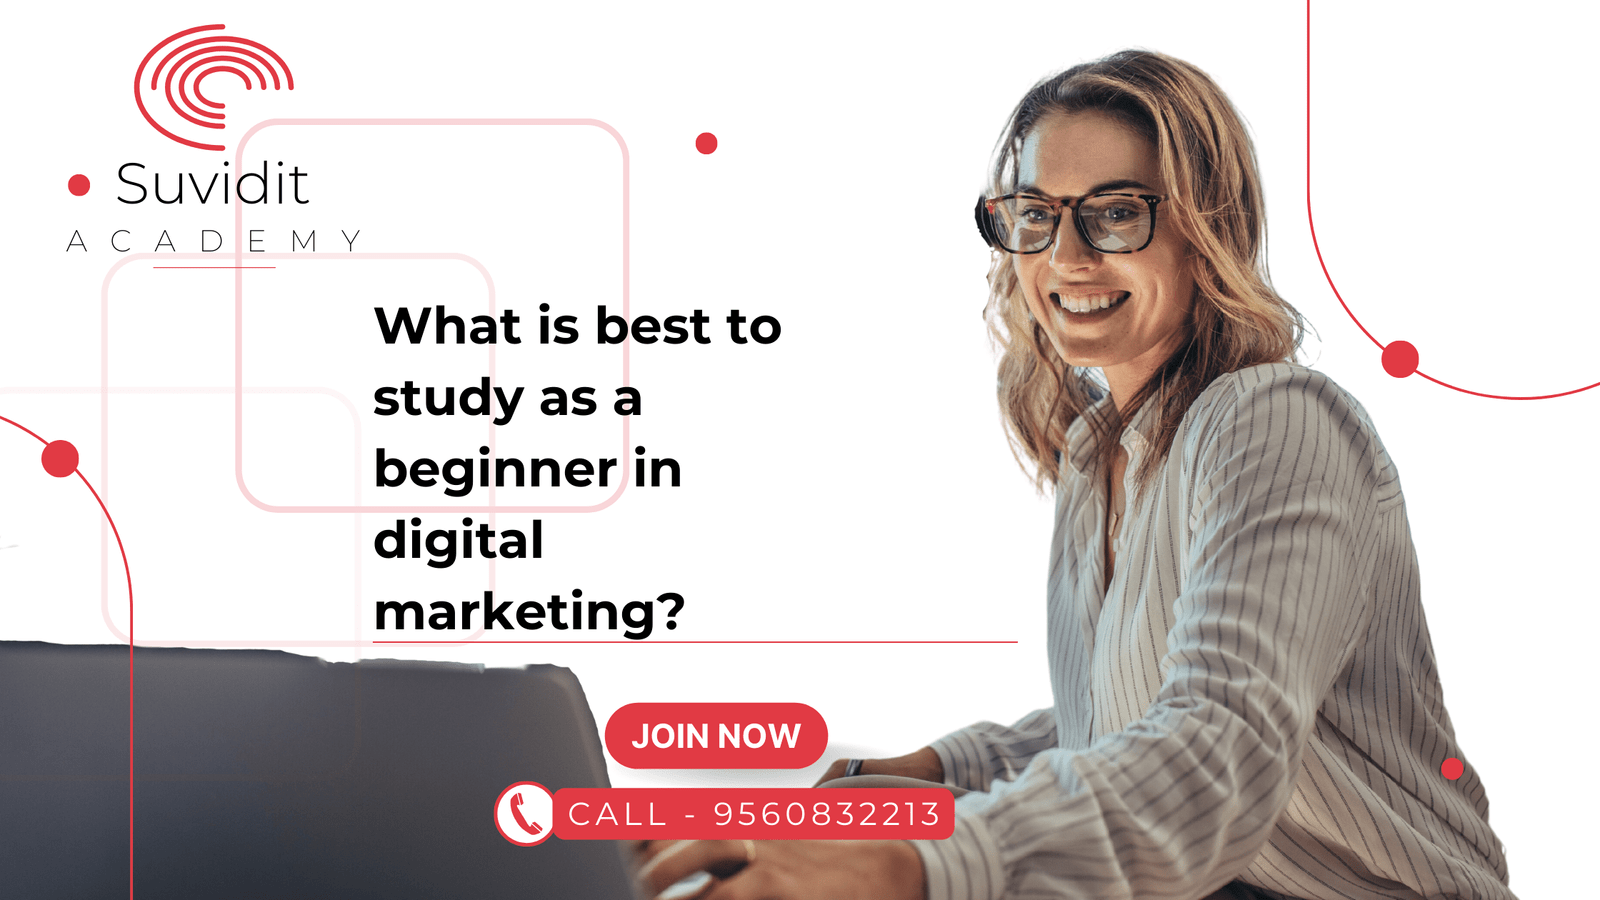 What is best to study as a beginner in digital marketing?